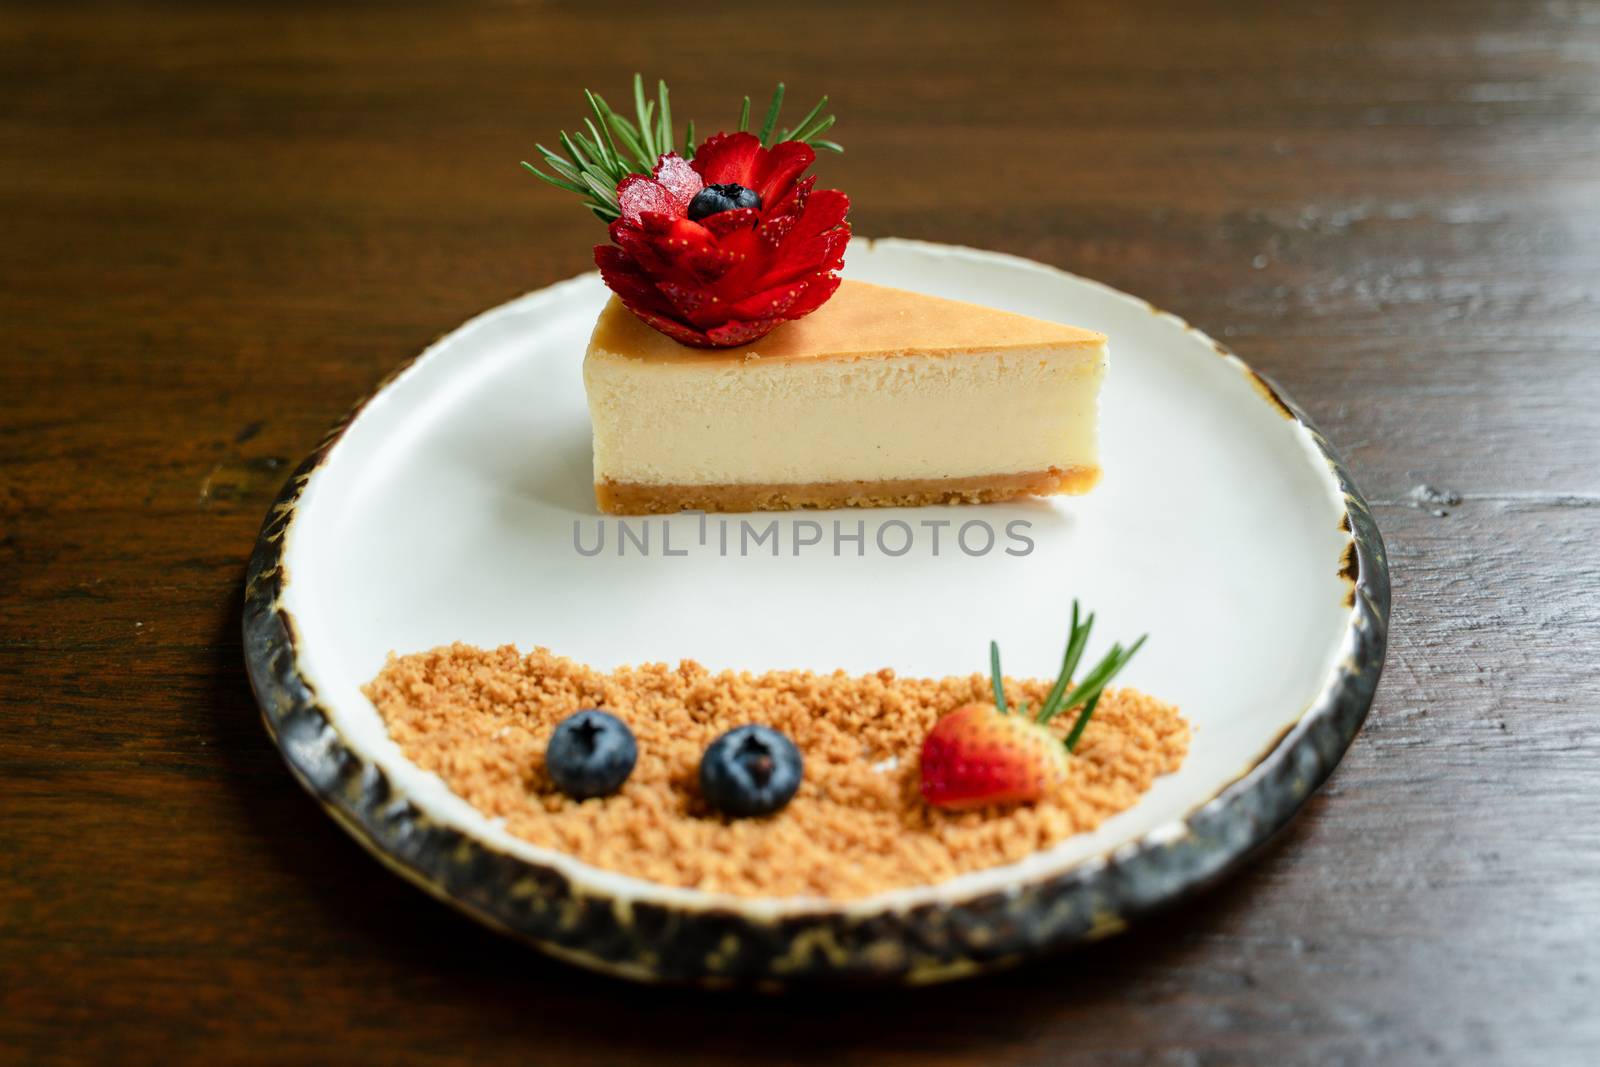 Top view photos of beautifully decorated cakes on white tiled plates and background of old wooden tables